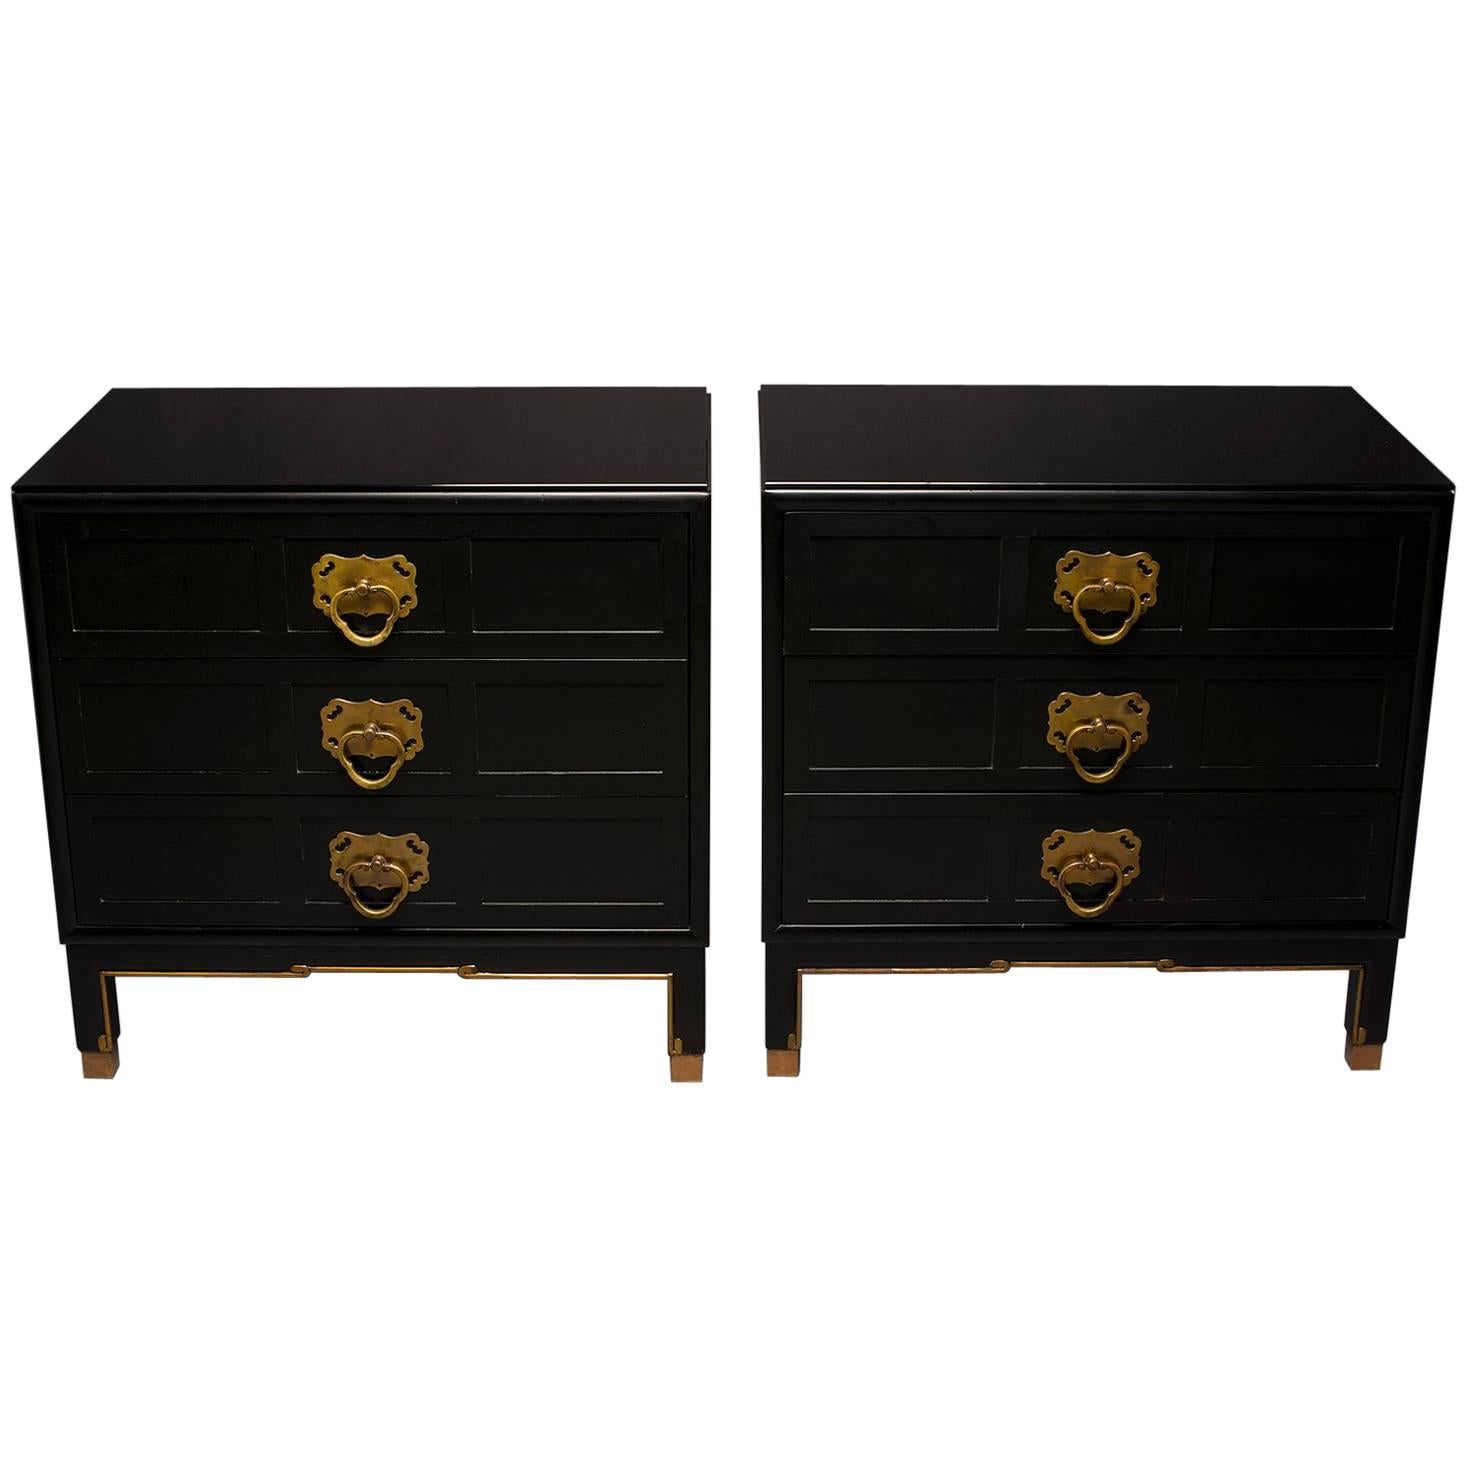 Pair of Midcentury Asian Style Three Drawer Chests